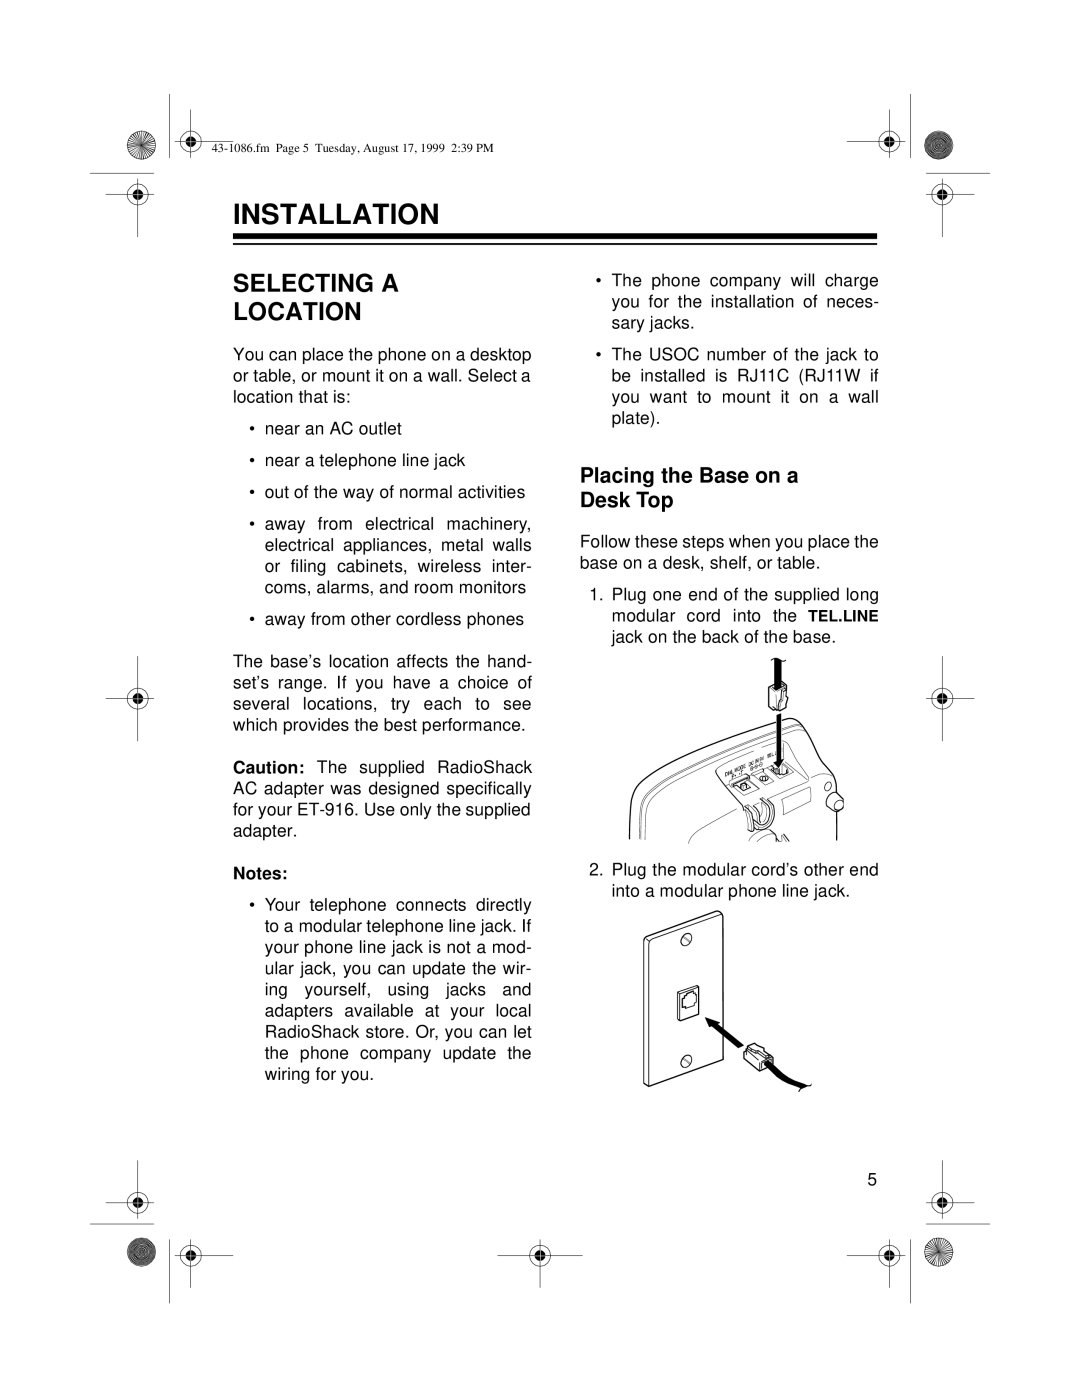 Radio Shack ET-916 owner manual Installation, Selecting A Location, Placing the Base on a Desk Top 